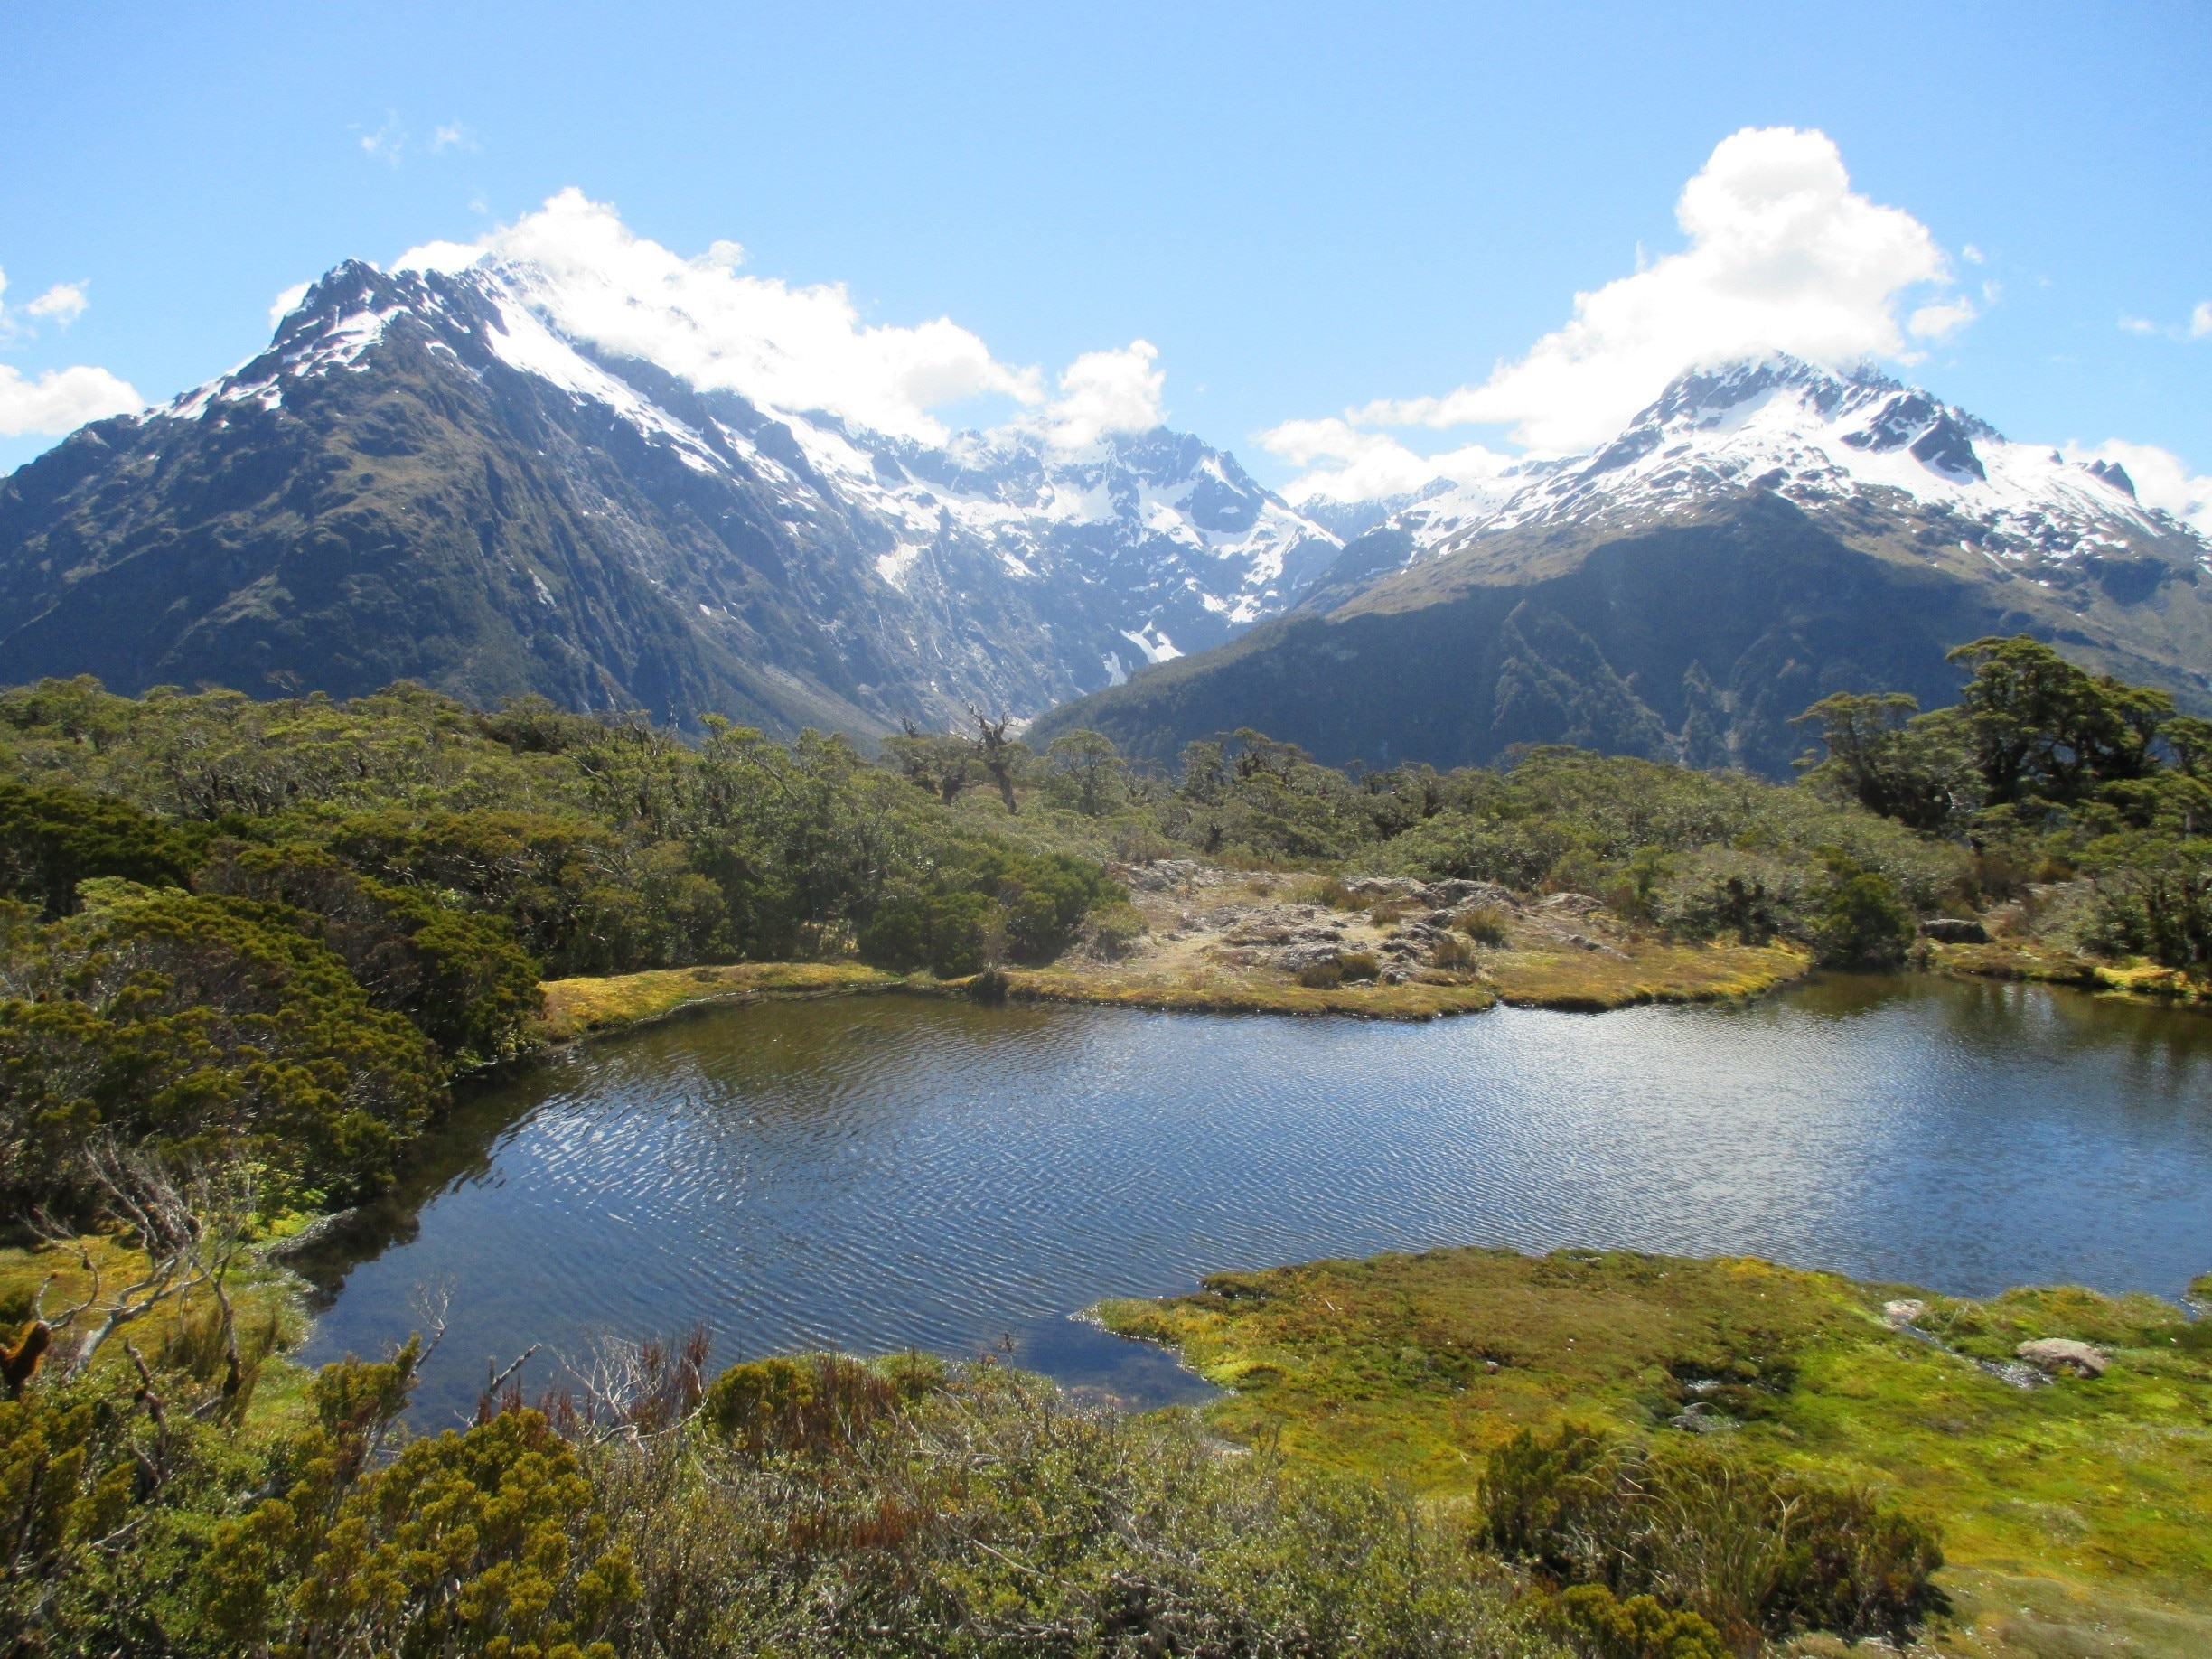 The Key Summit Track is a beautiful short day hike off the Milford Road in New Zealand. 3.4km return from the main road. Also accessible as a detour at the end or beginning of the Routeburn Track. #Hiking #Milford #NewZealand